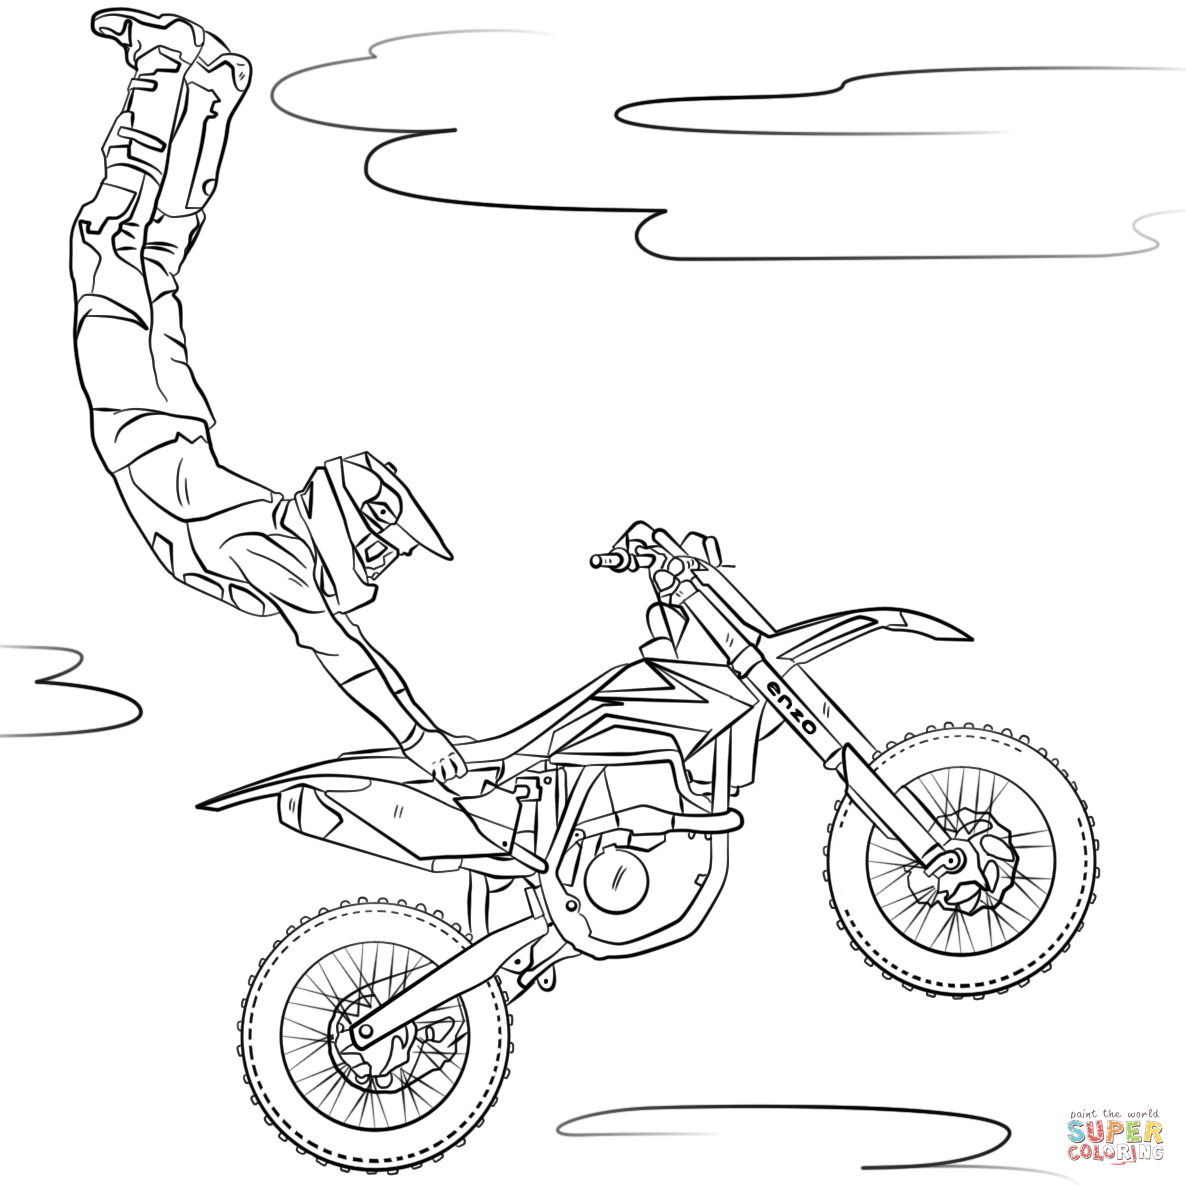 Transport coloring pages | Free Coloring Pages